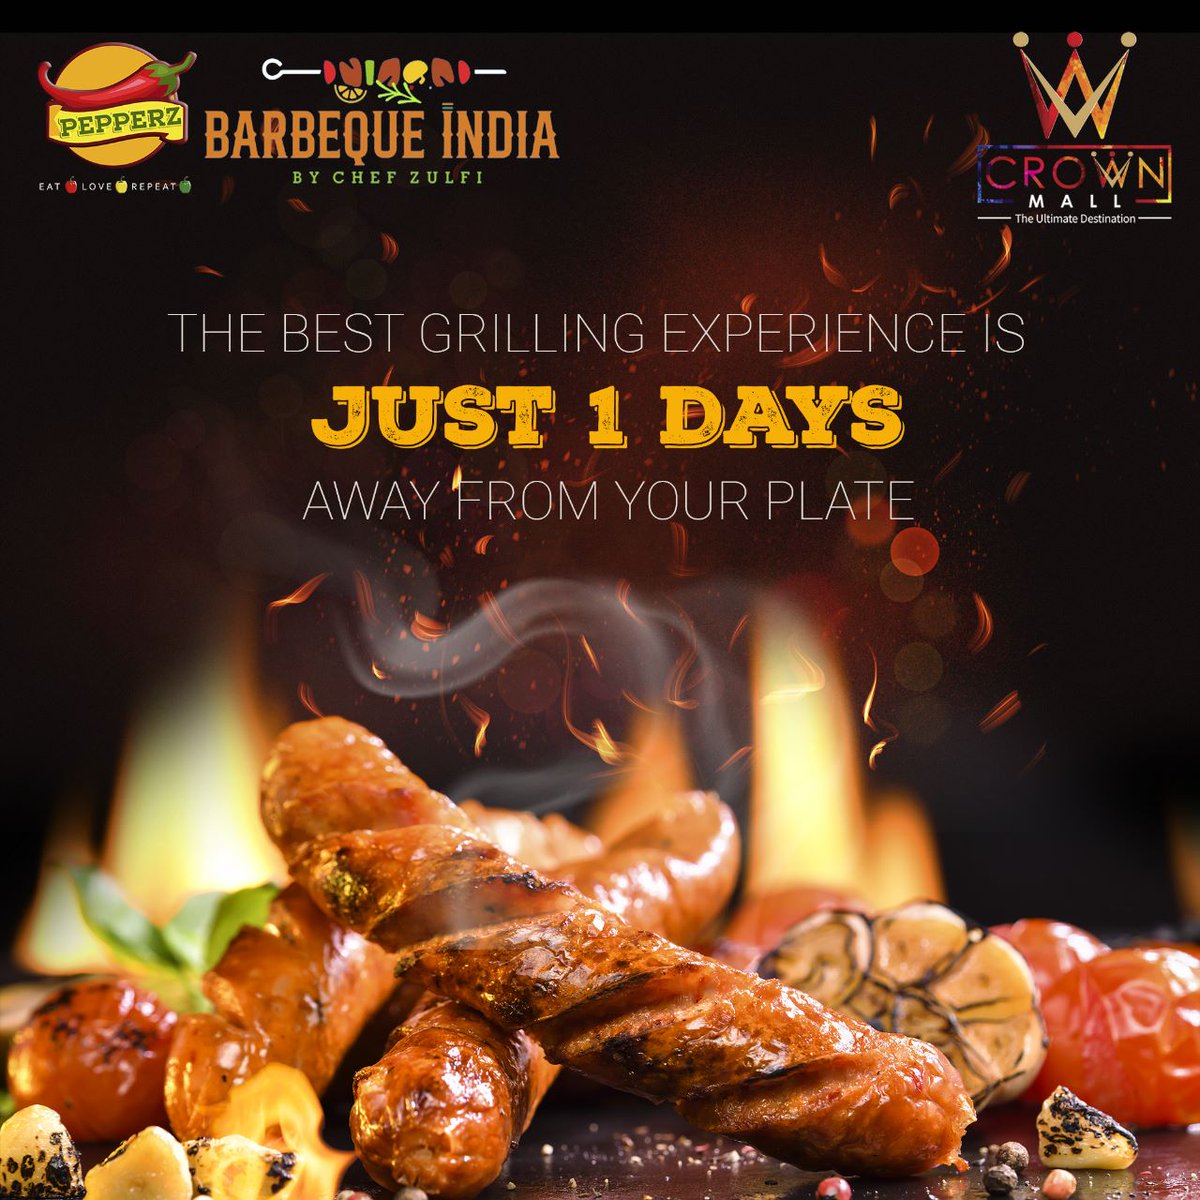 The best grilling experience is just 1 Days away from your plate! Your favorite grills from the Barbeque India. Visit Crown Mall !! 

#CrownMall #BarbequeIndia #BarbequeGrill #BarbequeNation #ShoppingMall #Lucknow #shoppingmallinlucknow #bestshoppingmall #lucknowcity